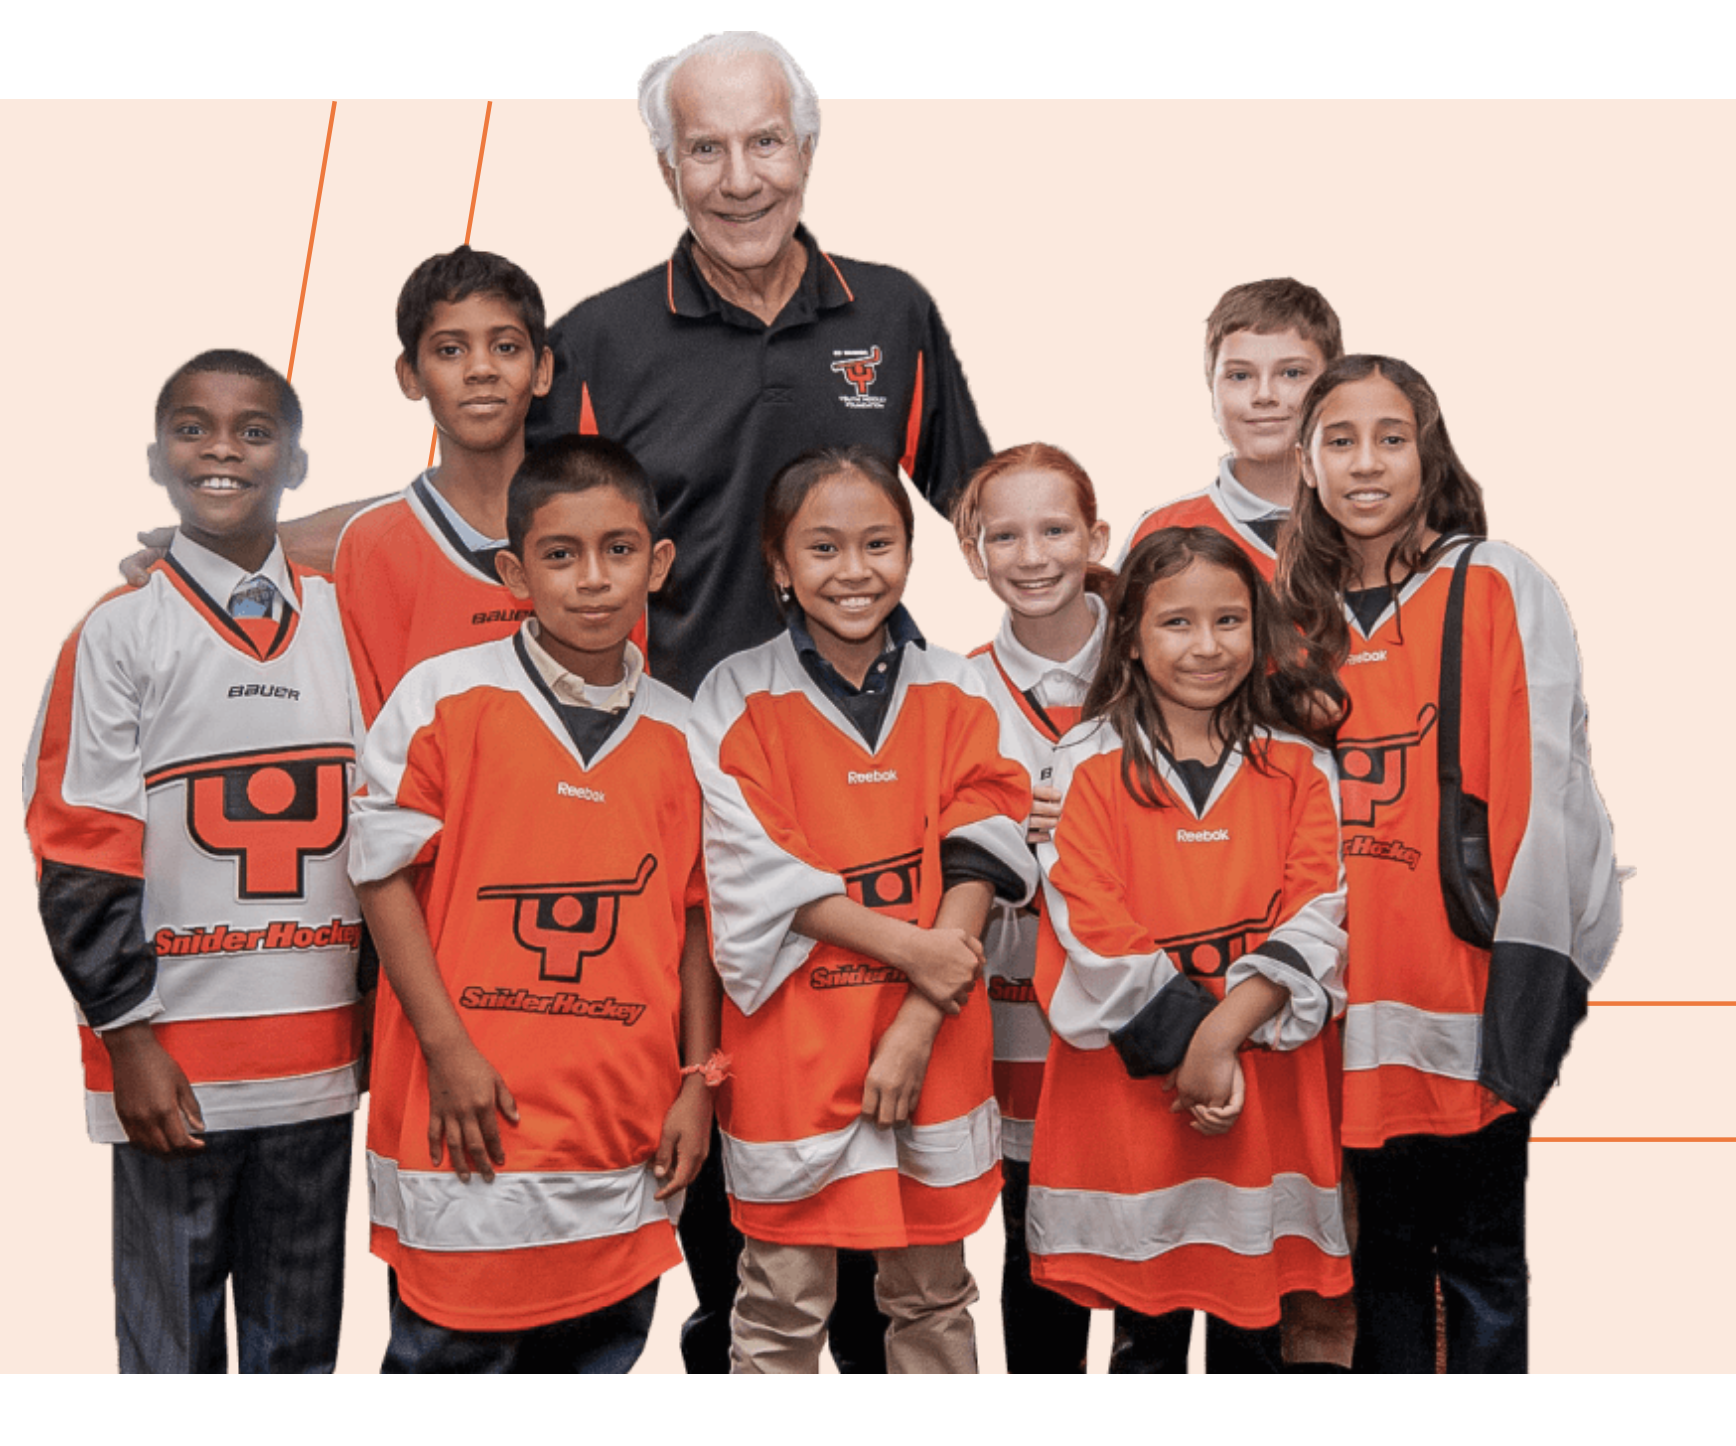 Ed Snider and students from his Youth Hockey & Education program.